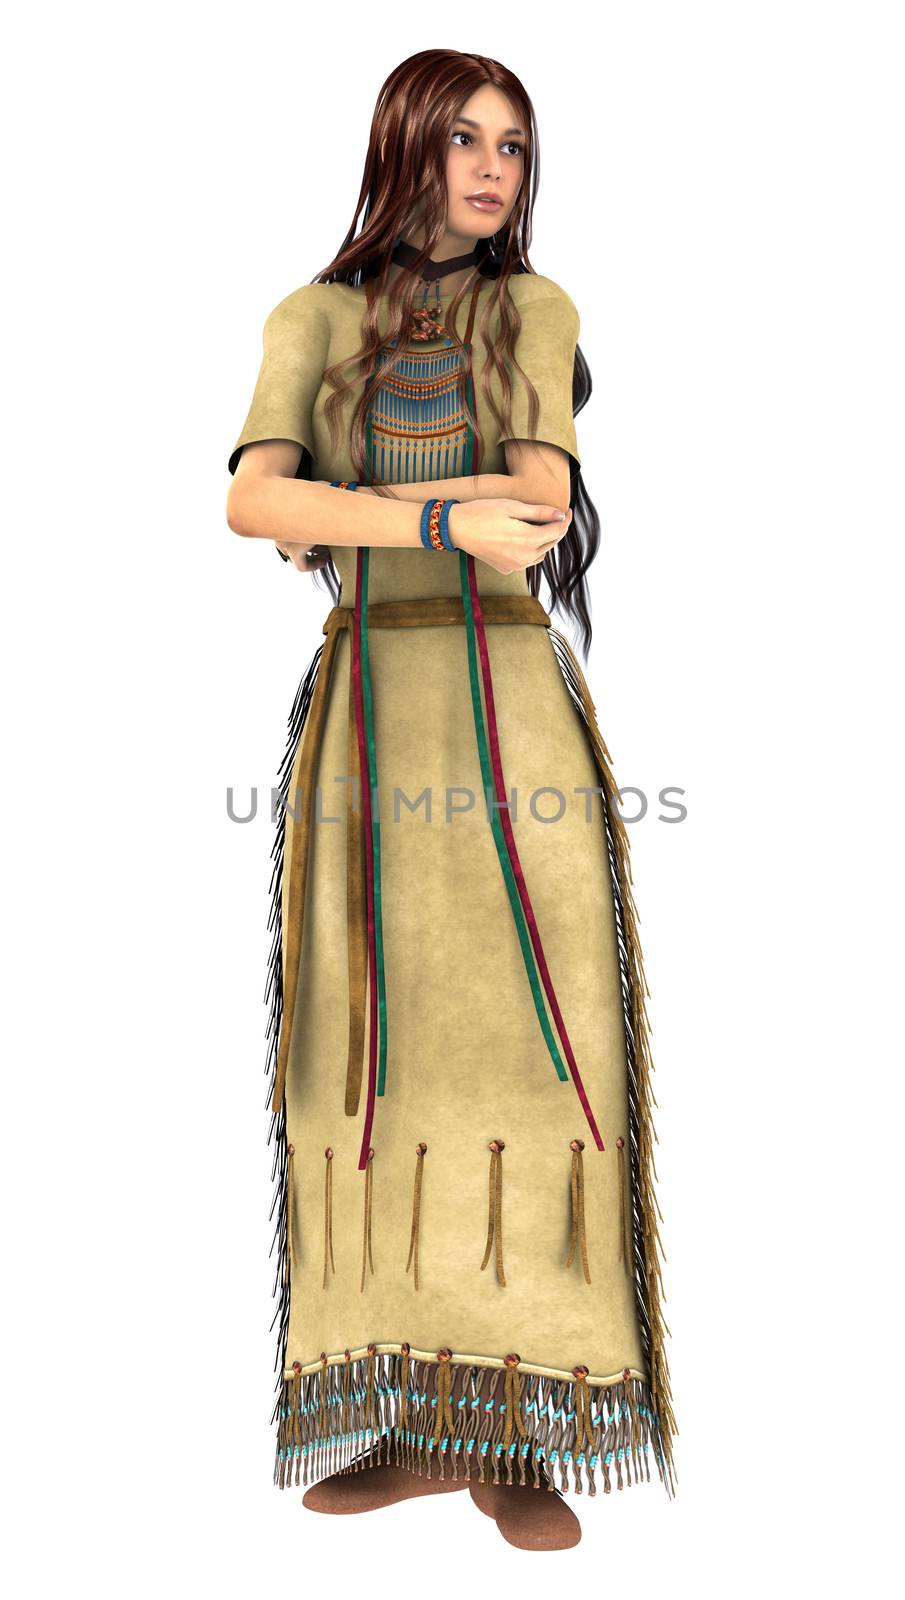 3D digital render of a beautiful native American young woman isolated on white background